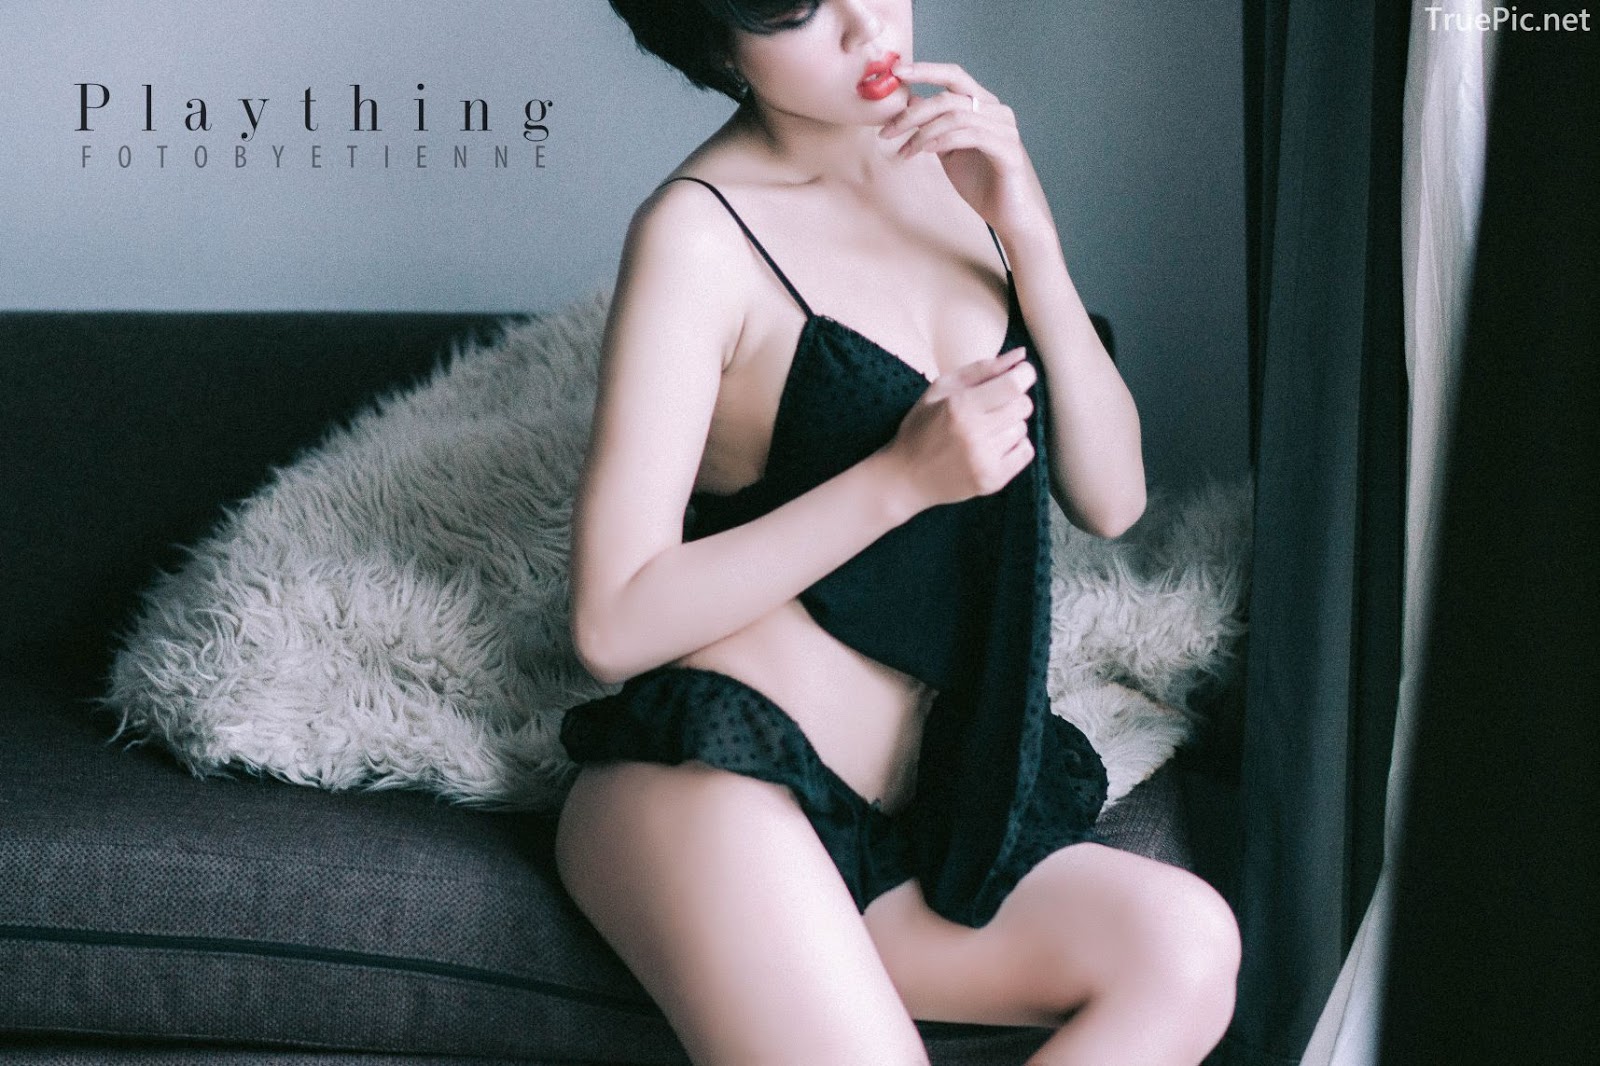 Super hot photos of Vietnamese beauties with lingerie and bikini - Photo by Le Blanc Studio - Part 1 - Picture 53